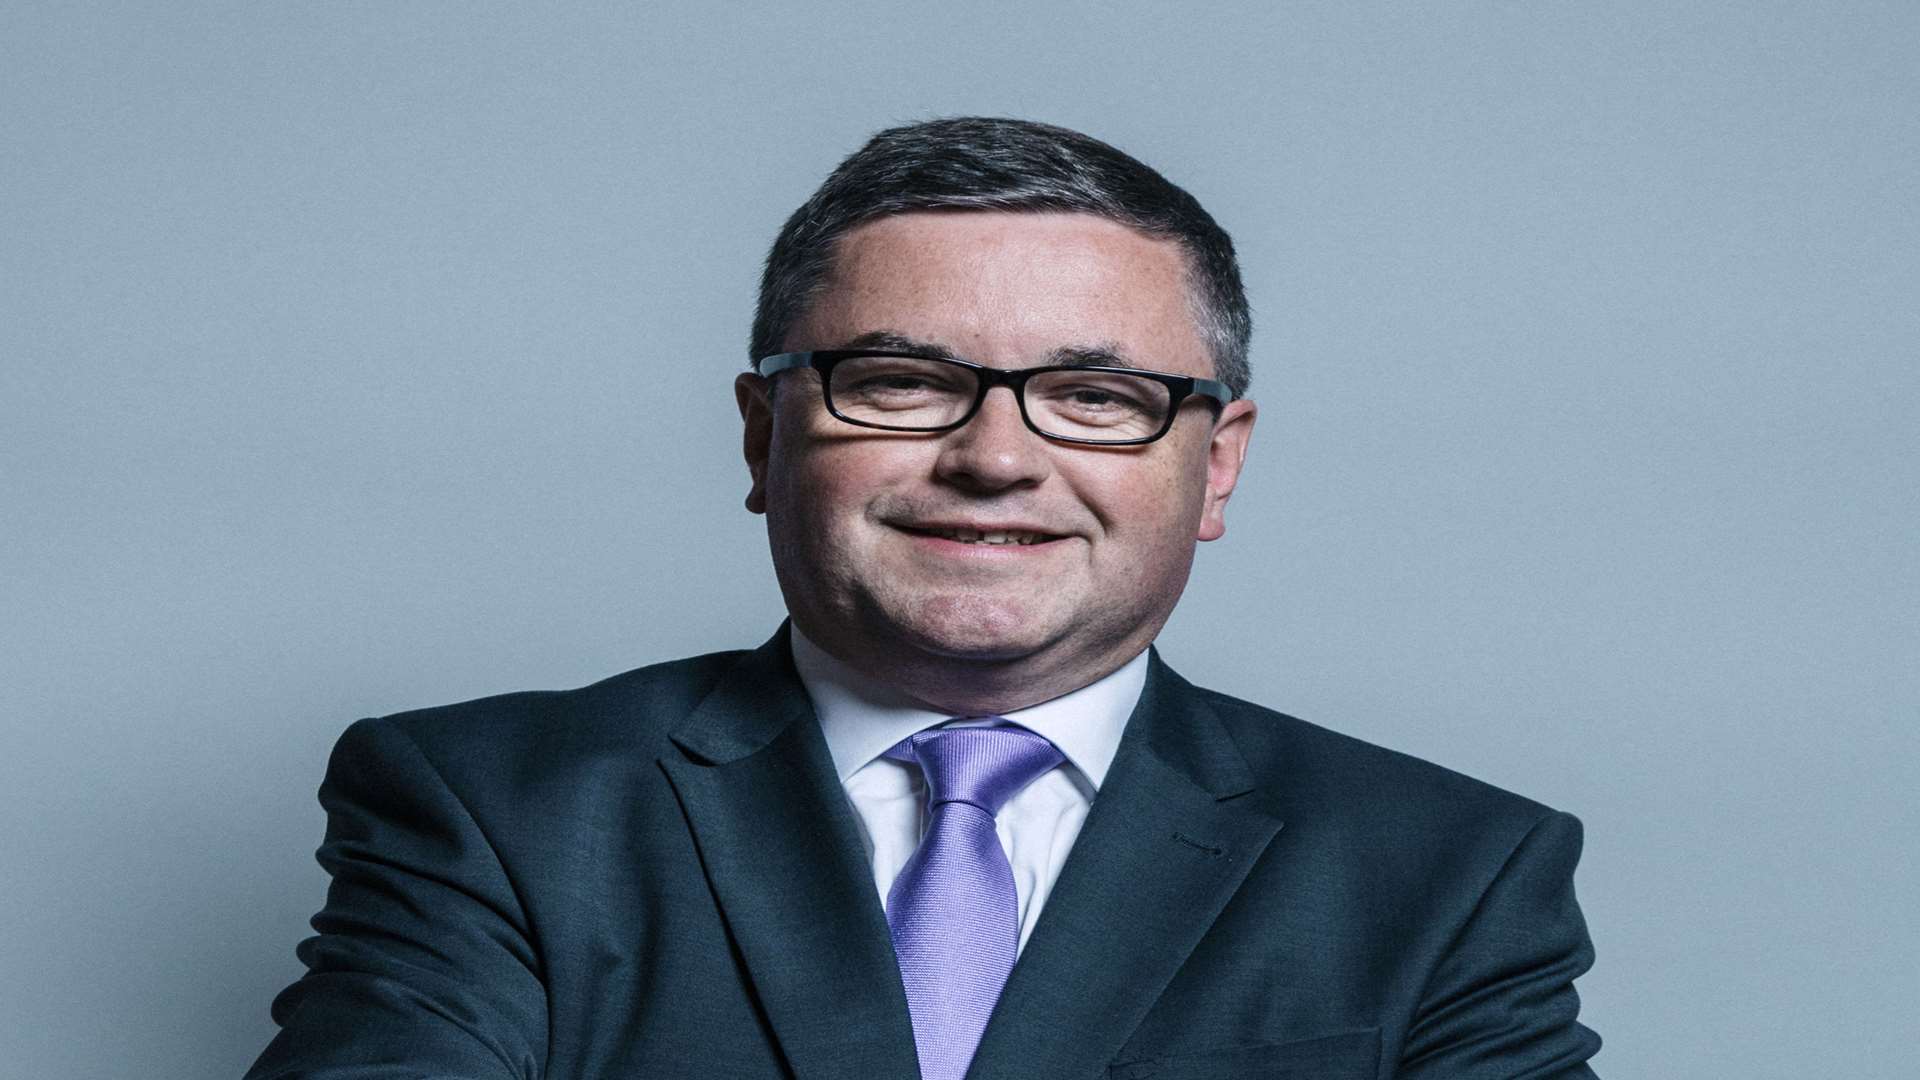 Assistant attorney general and solicitor general Robert Buckland MP